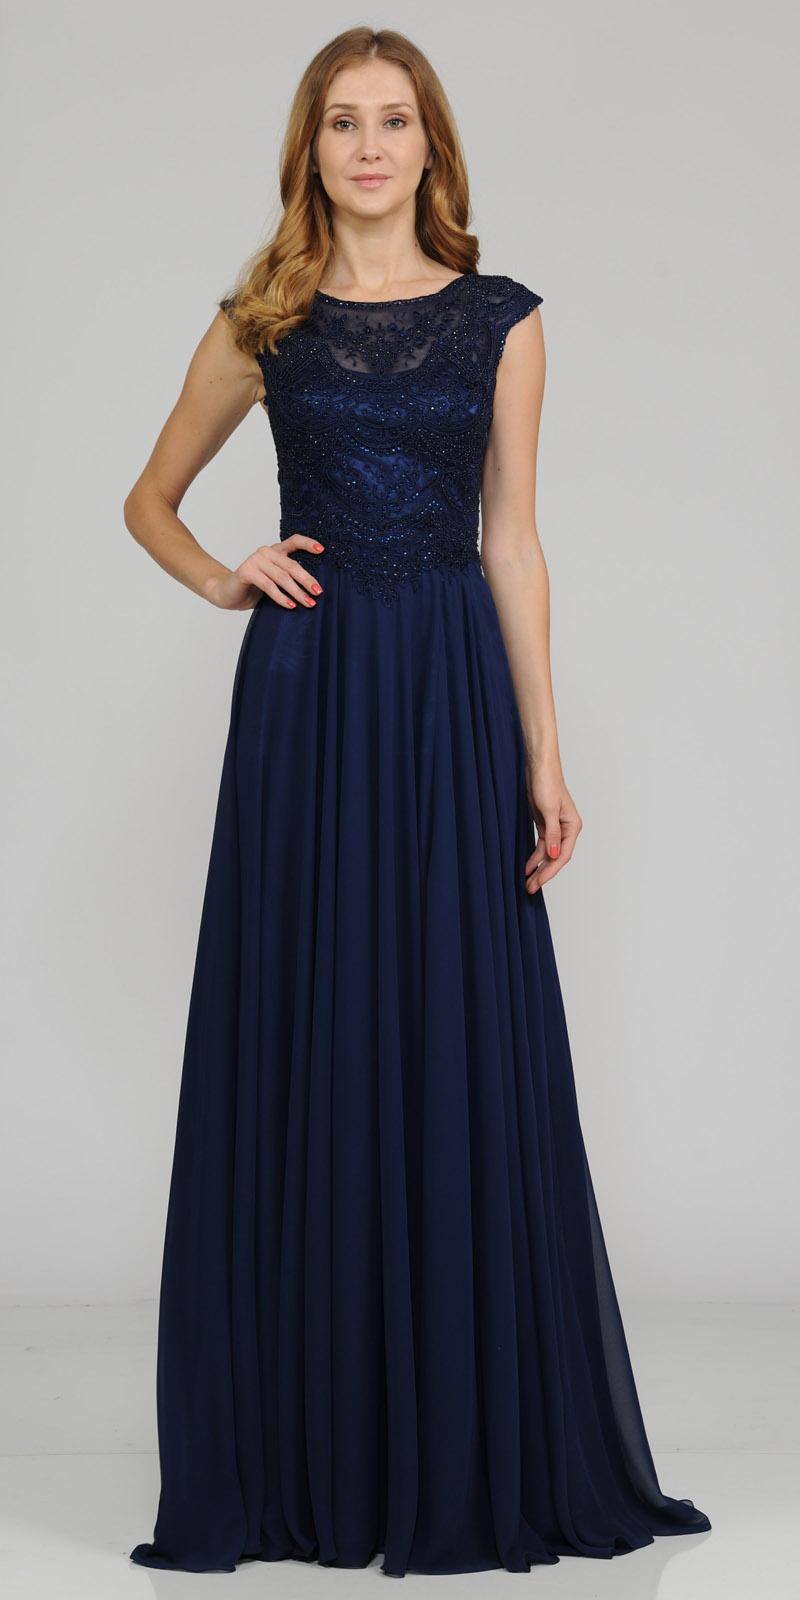 Poly USA 8254 Navy Blue Cap Sleeves Embroidered Long Formal Dress with Slit